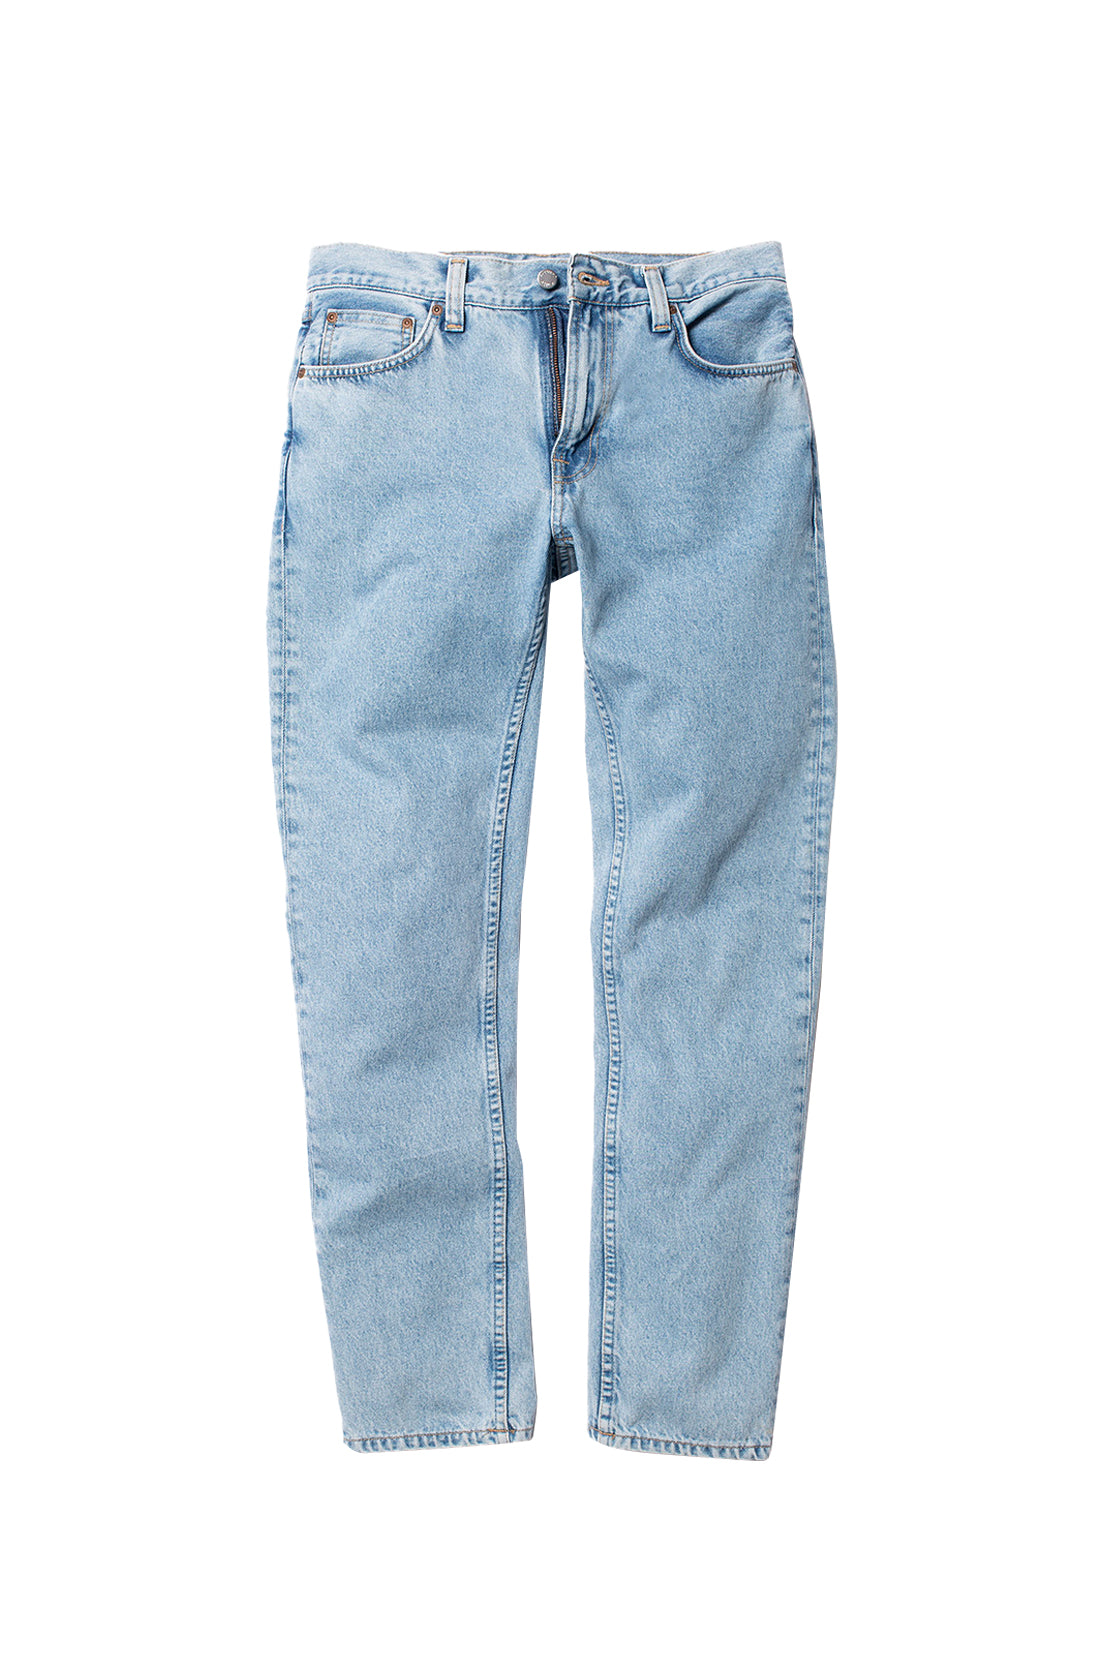 Nudie Jeans Gritty Jackson Jean L32 Sunny Blue